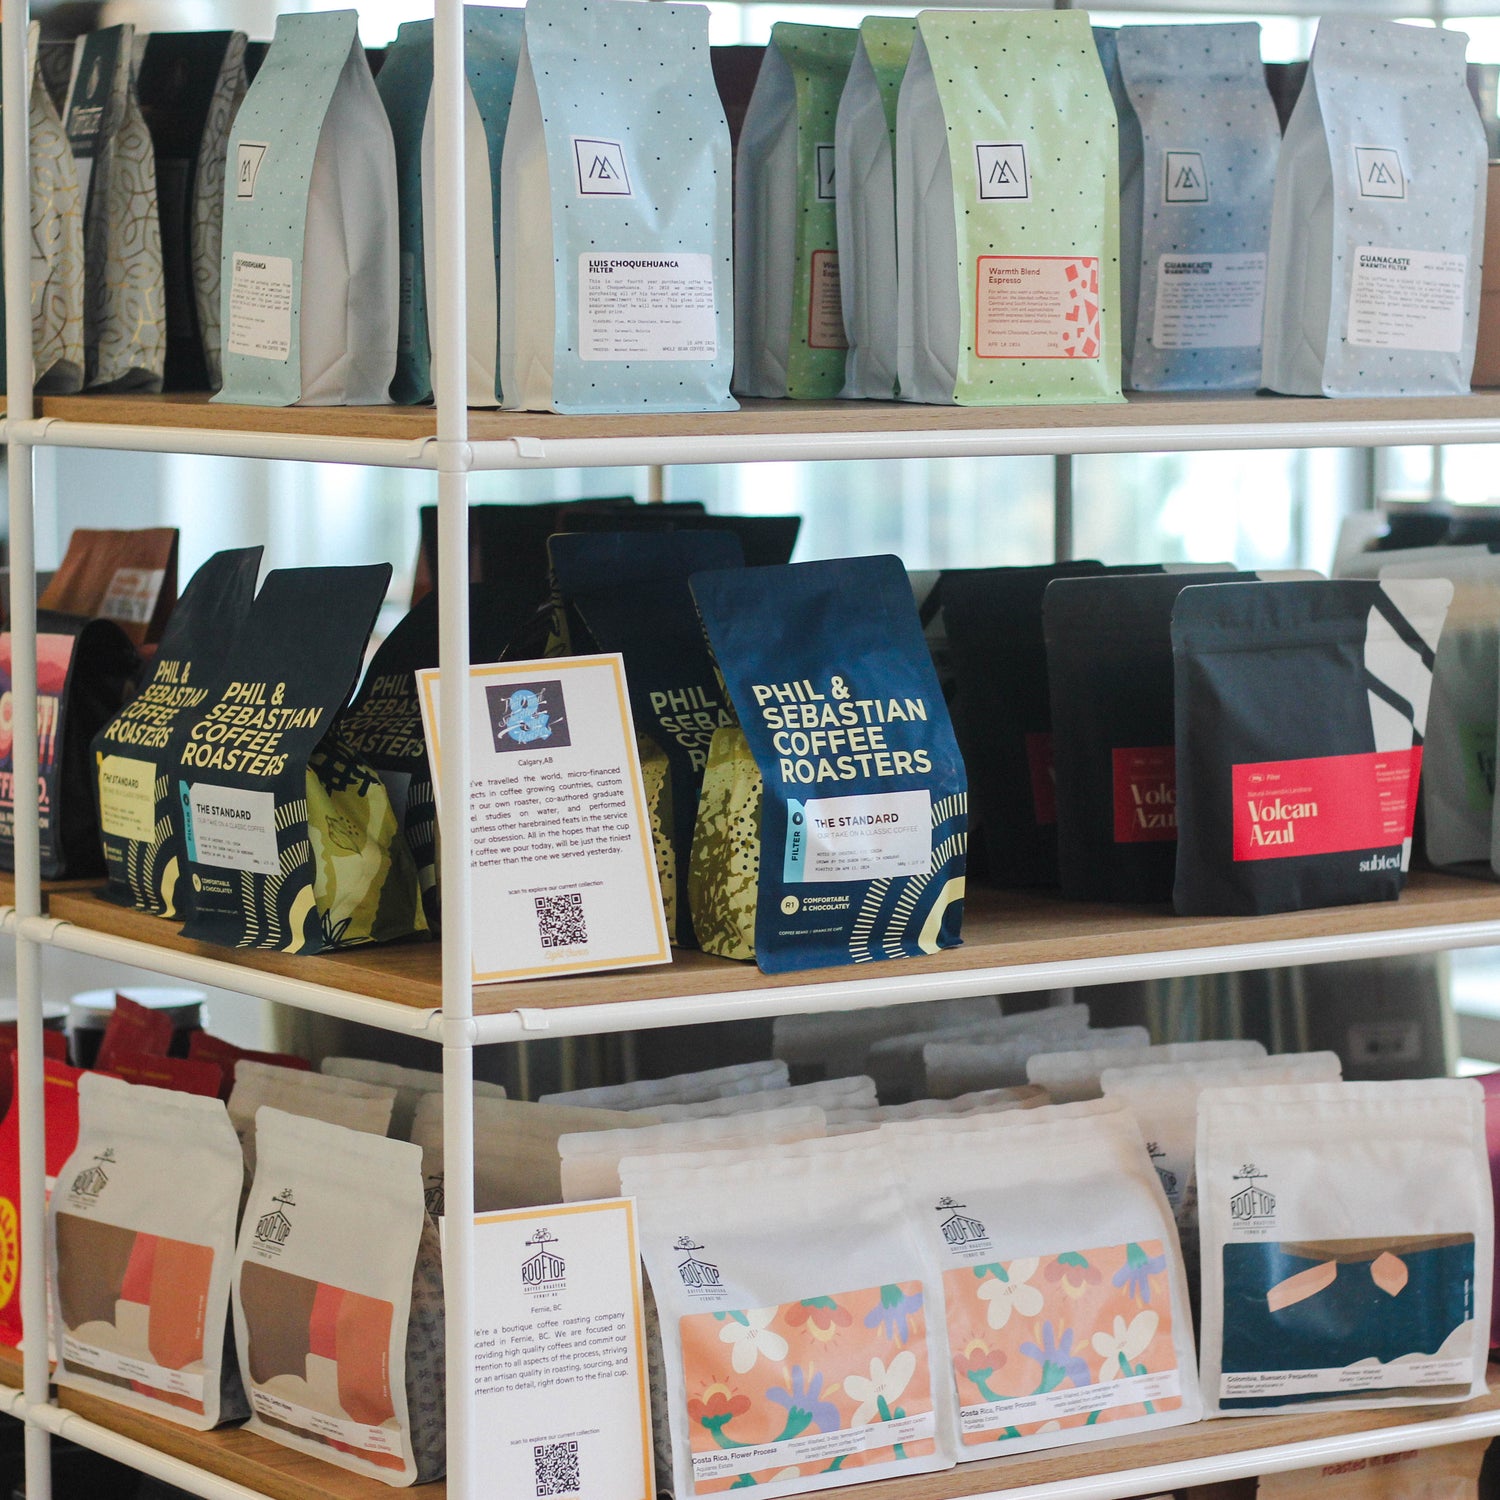 Bags of coffee displayed on a wall